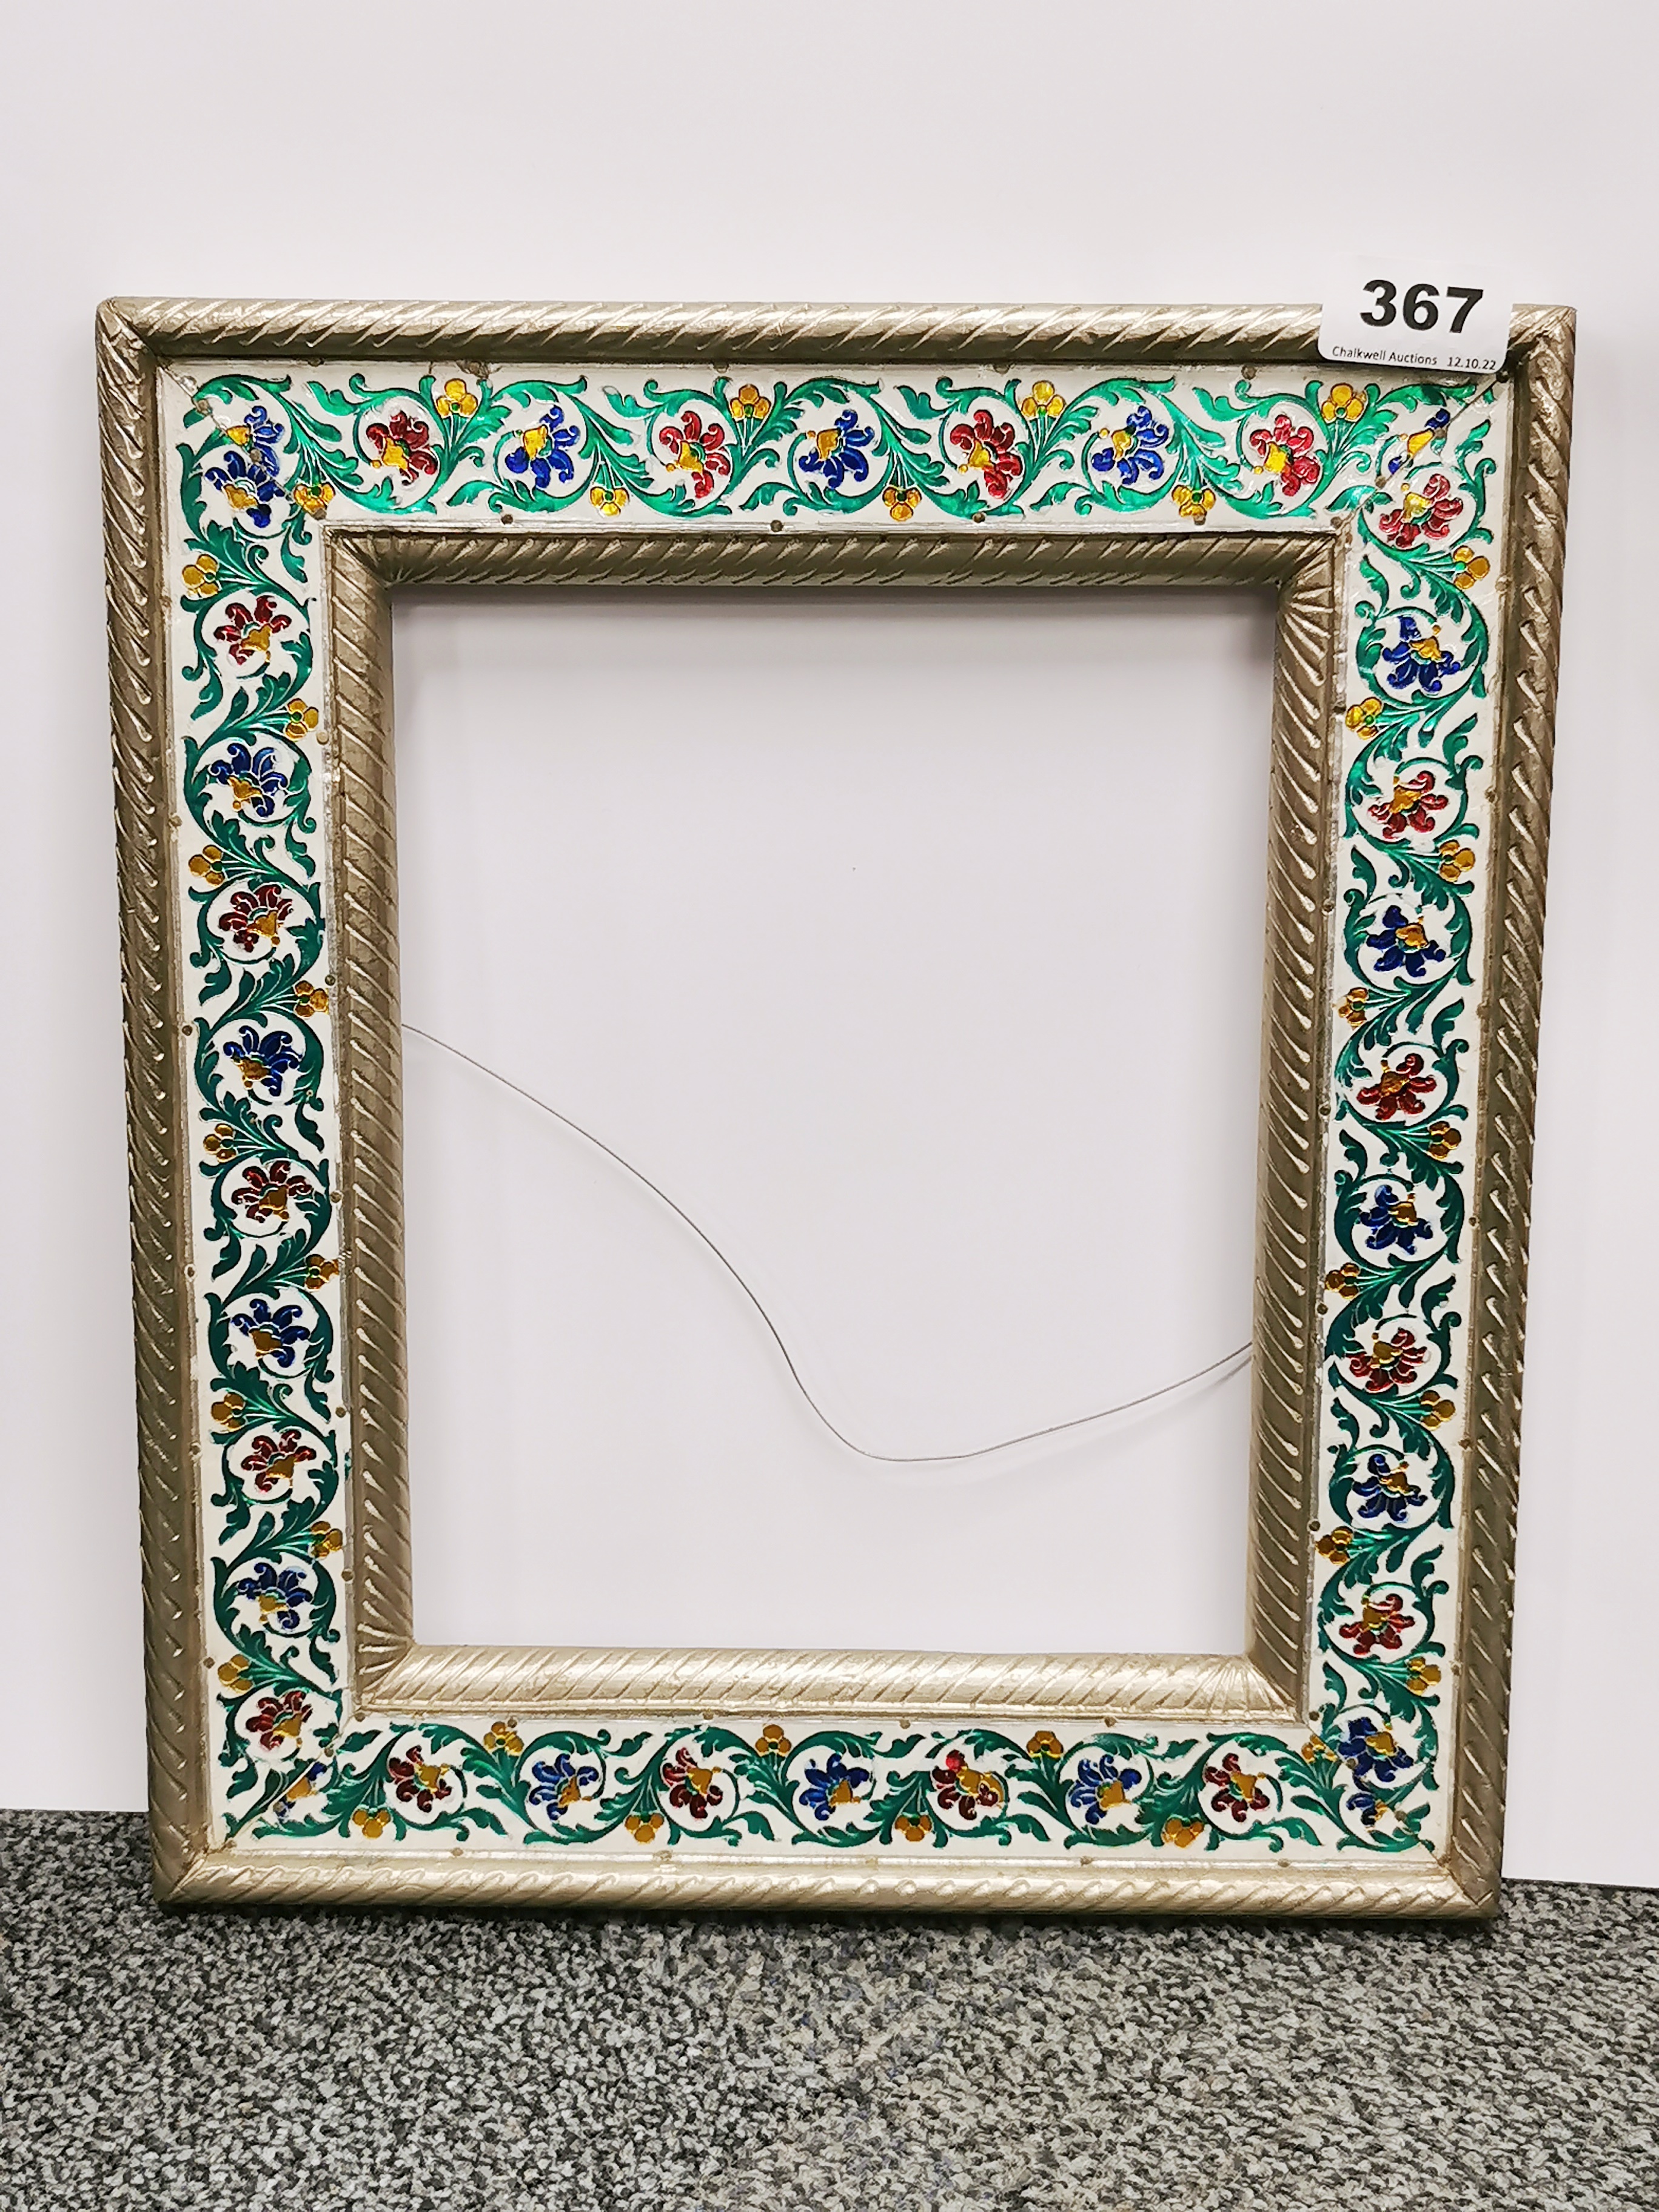 A Persian metal covered picture/mirror frame, 31 x 36cm.